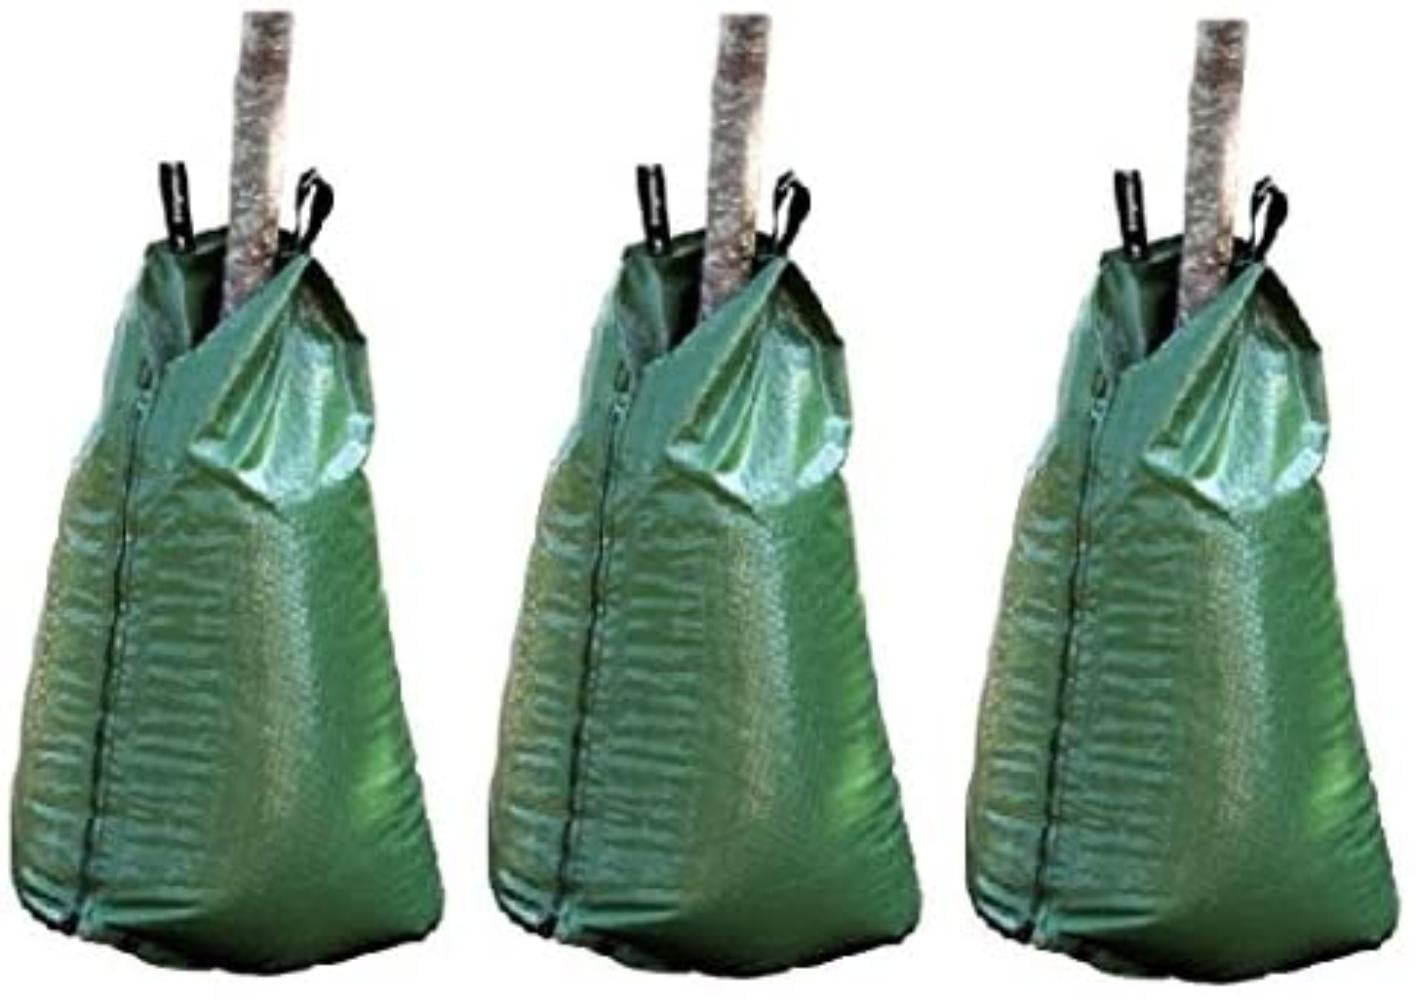 2 Pack 15 Gallon Slow Release Watering Bag for Trees Remiawy Tree Watering Bag Tree Irrigation Bag Made of Durable PVC Material with Zipper 